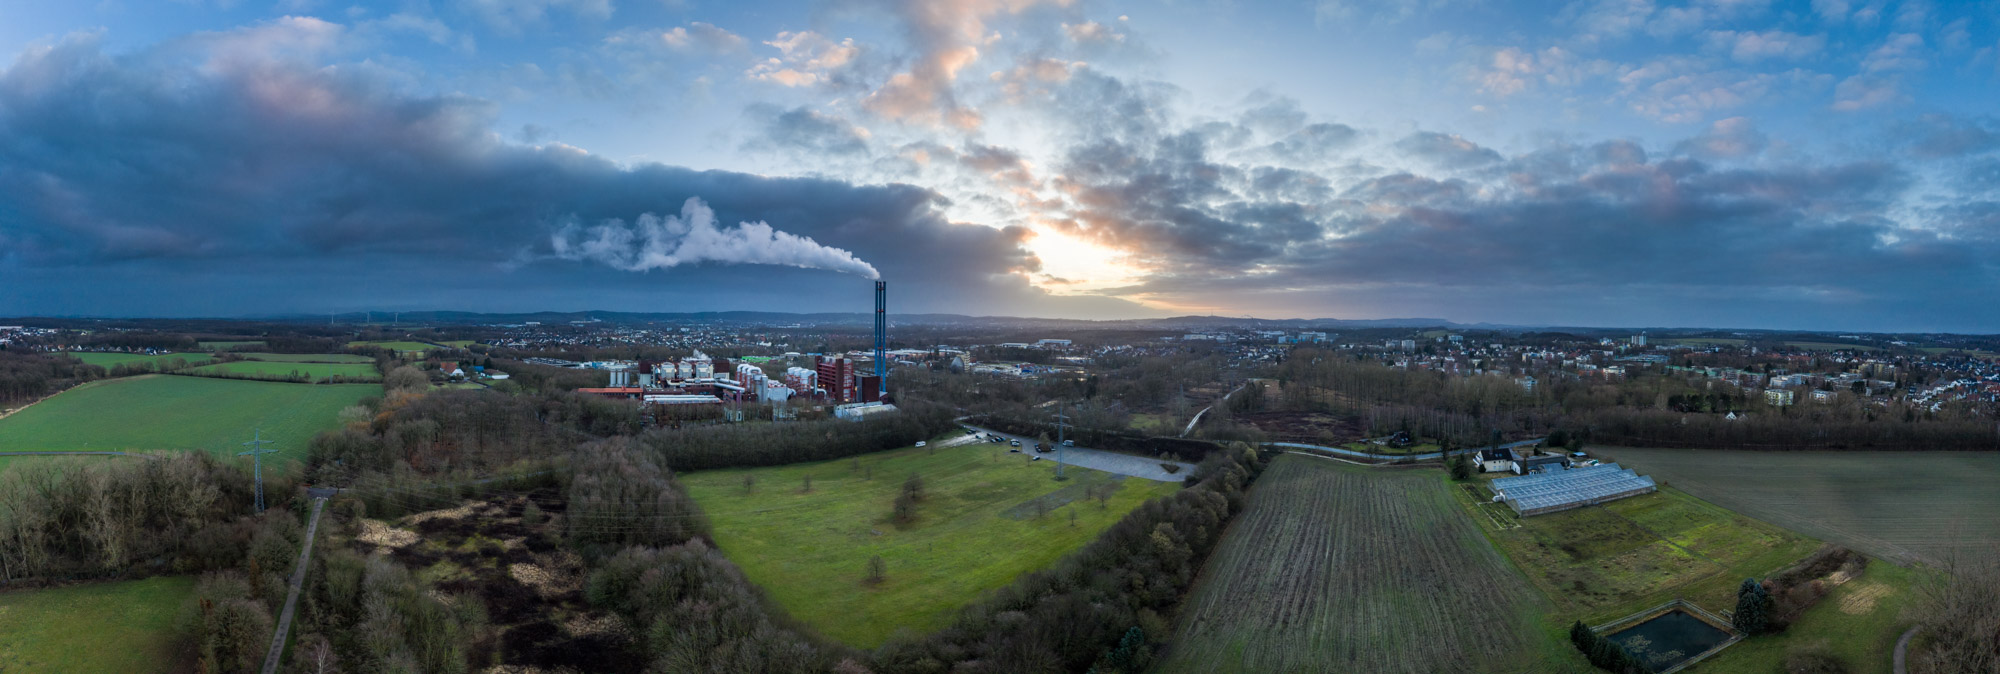 Sunset over the waste incineration plant in Bielefeld-Heepen (Germany).